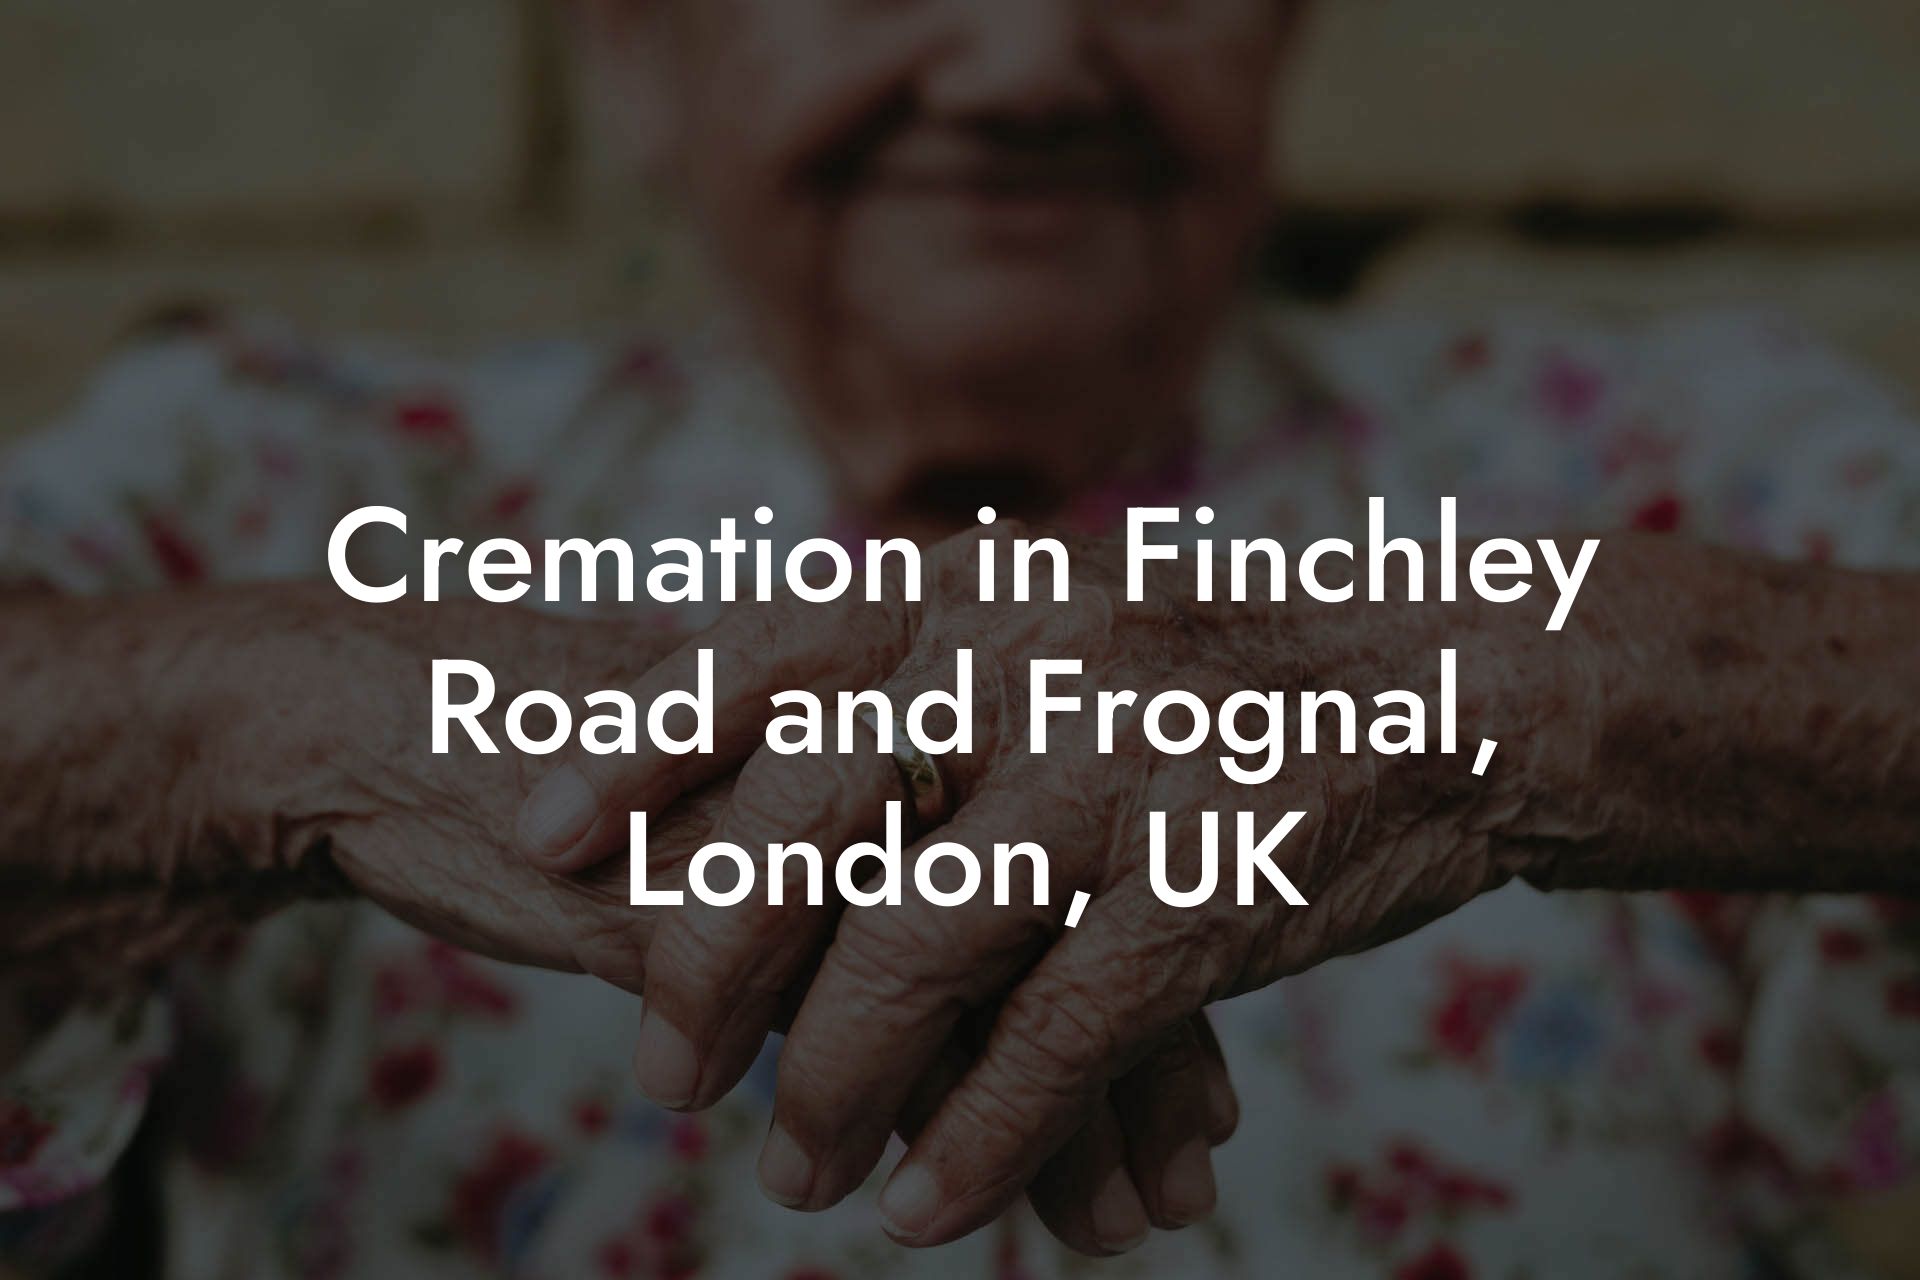 Cremation in Finchley Road and Frognal, London, UK